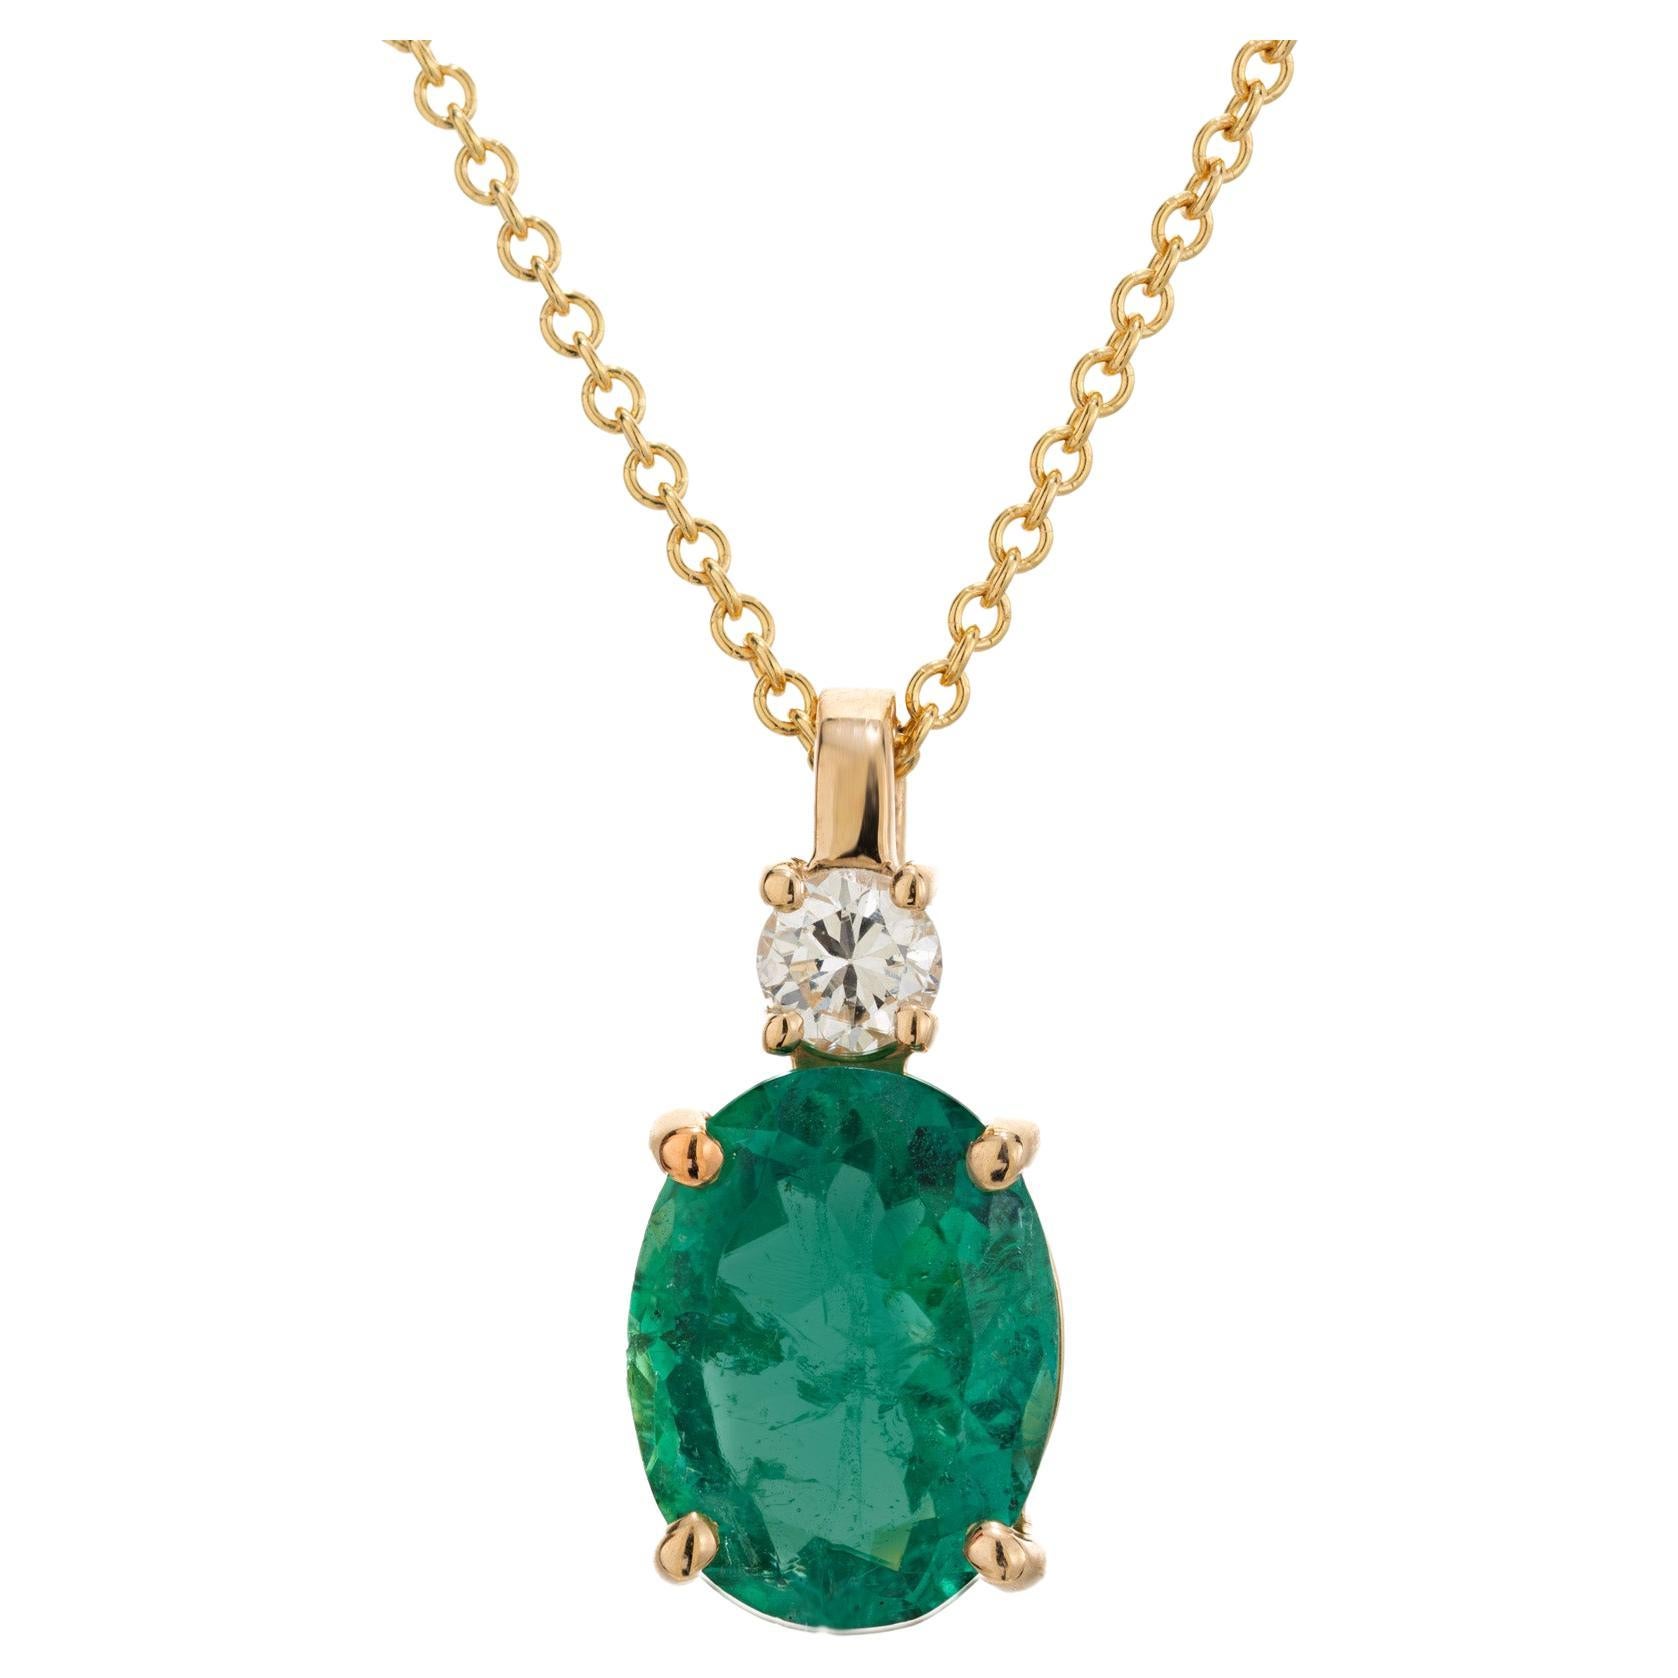 Peter Suchy GIA Certified Oval 2.63 Carat Emerald Diamond Gold Pendant Necklace